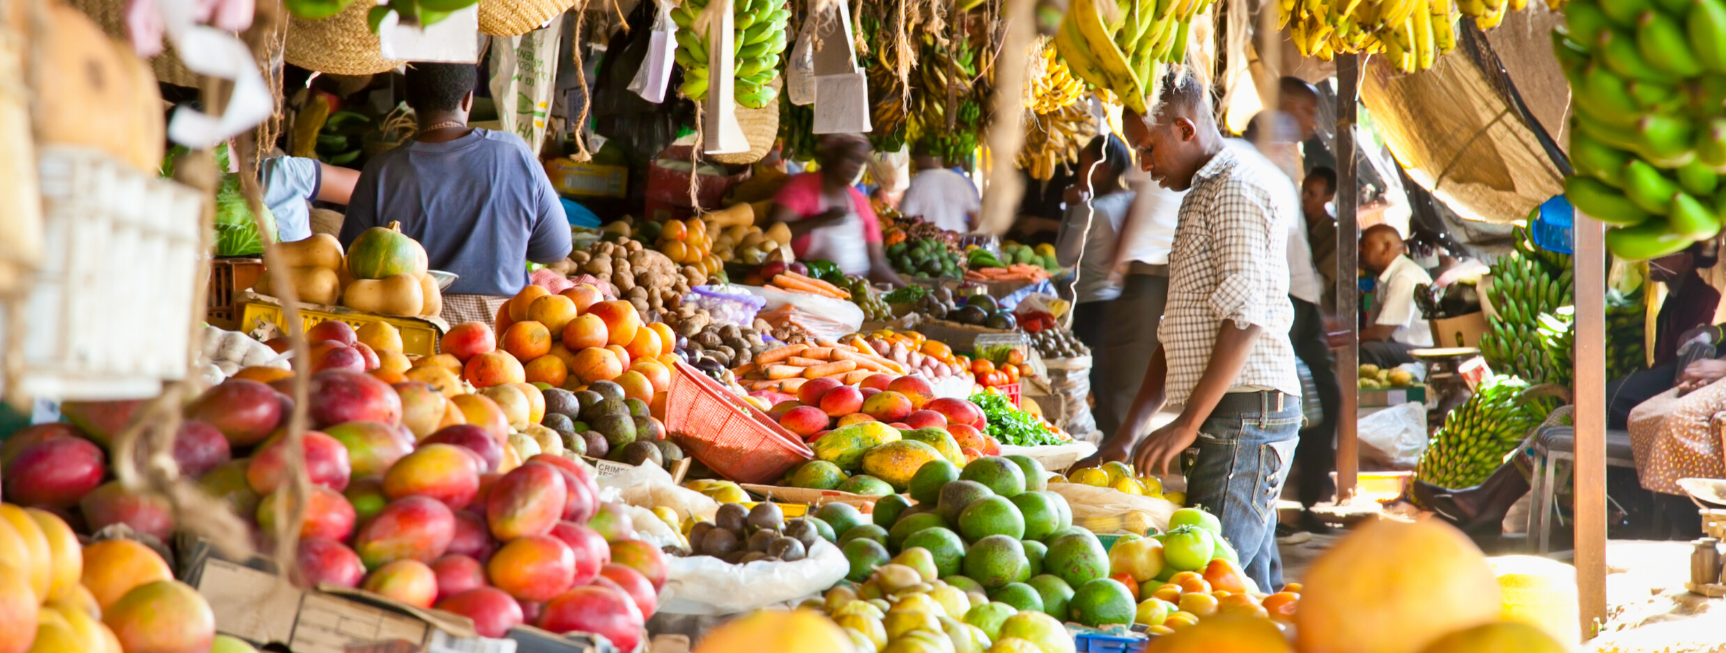 An image of a busy African market. There are a variety of colourful fruit on sale and several customers inspecting the goods on display.